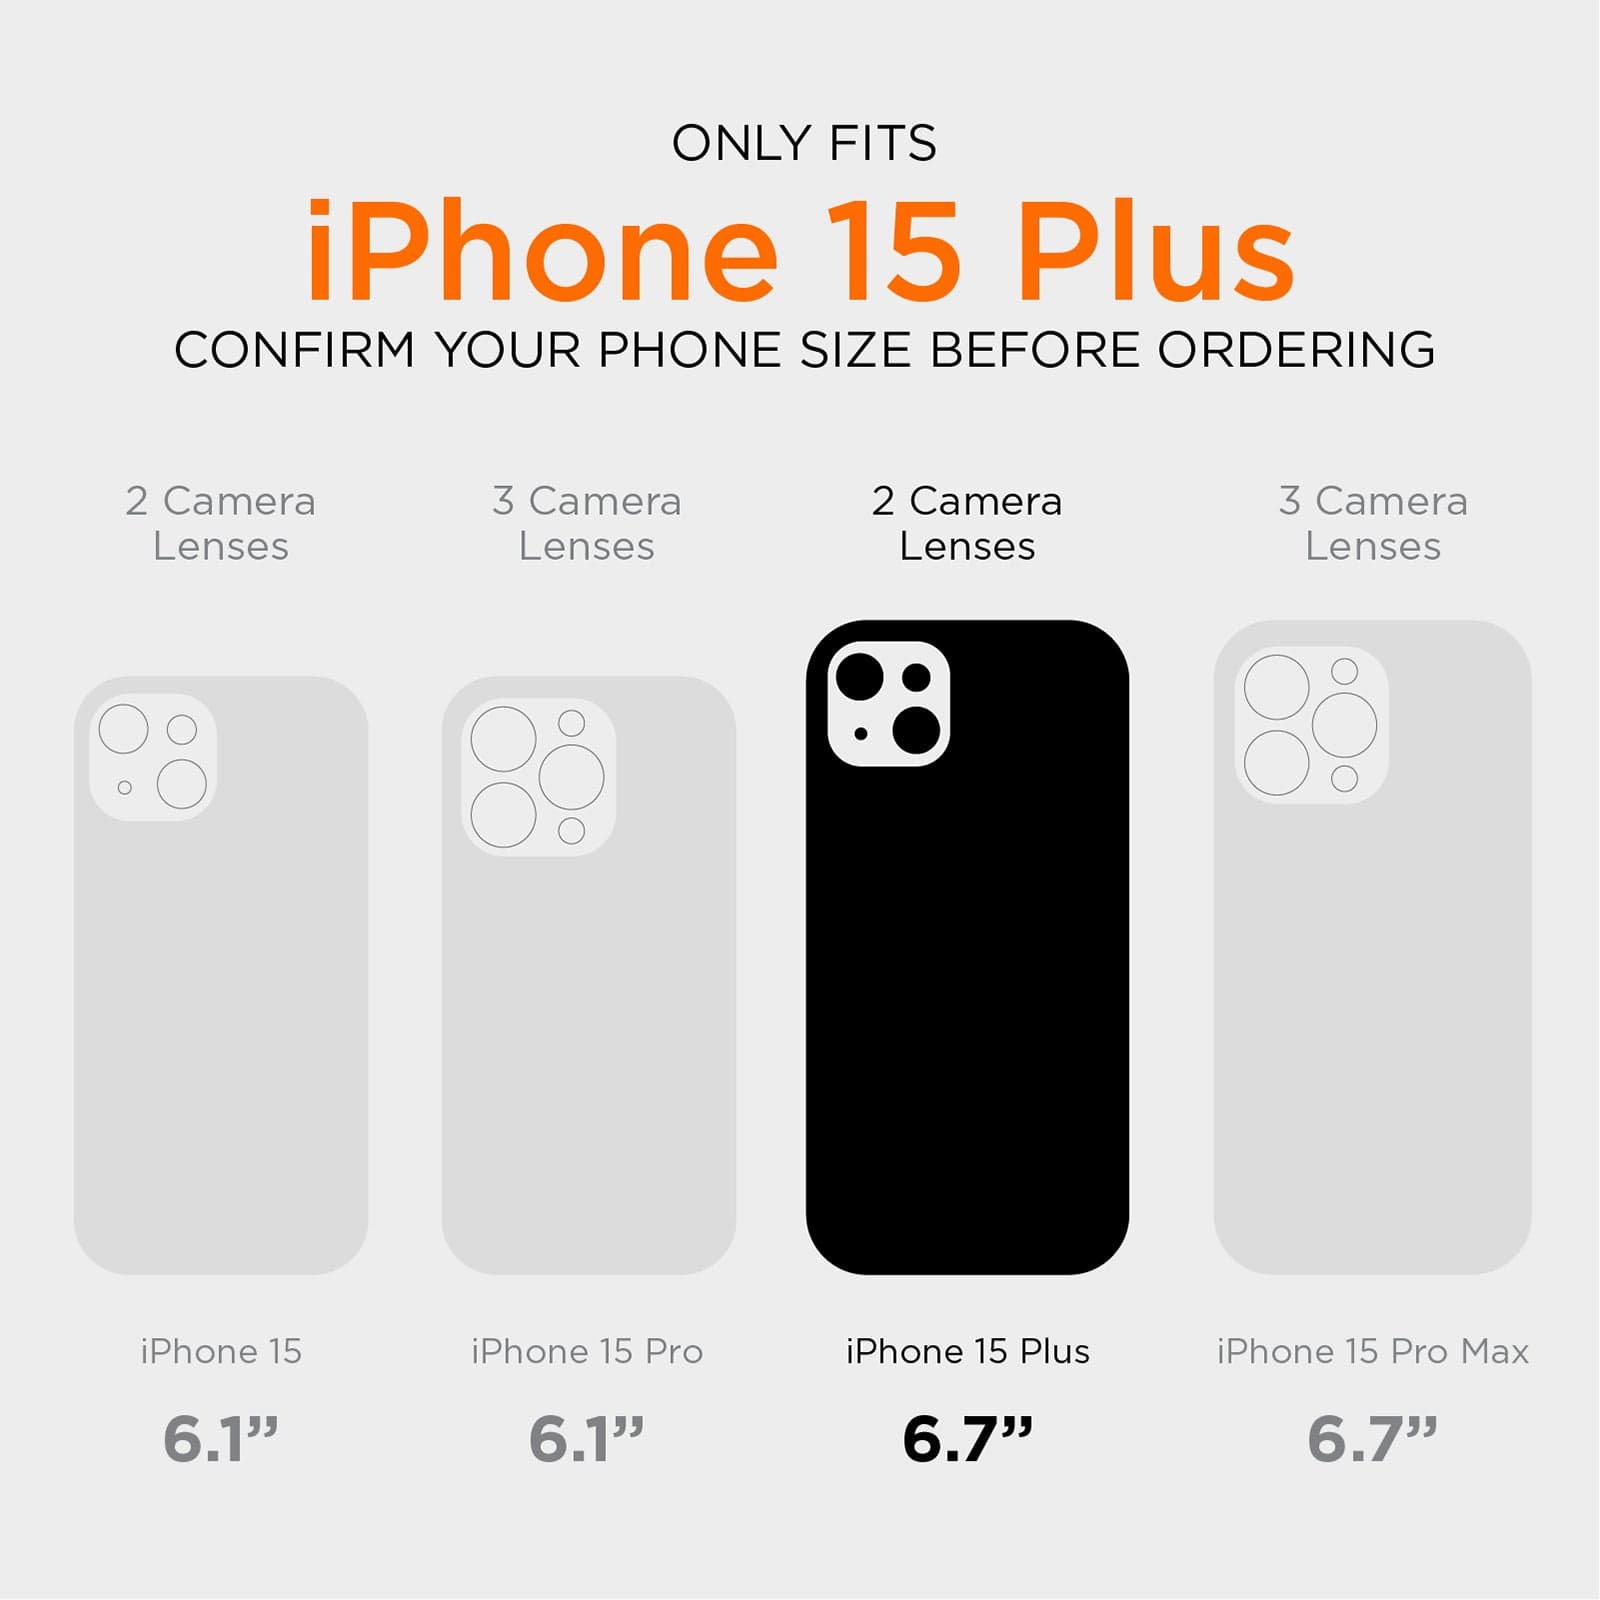 ONLY FITS IPHONE 15 PLUS. CONFIRM YOUR PHONE SIZE BEFORE ORDERING